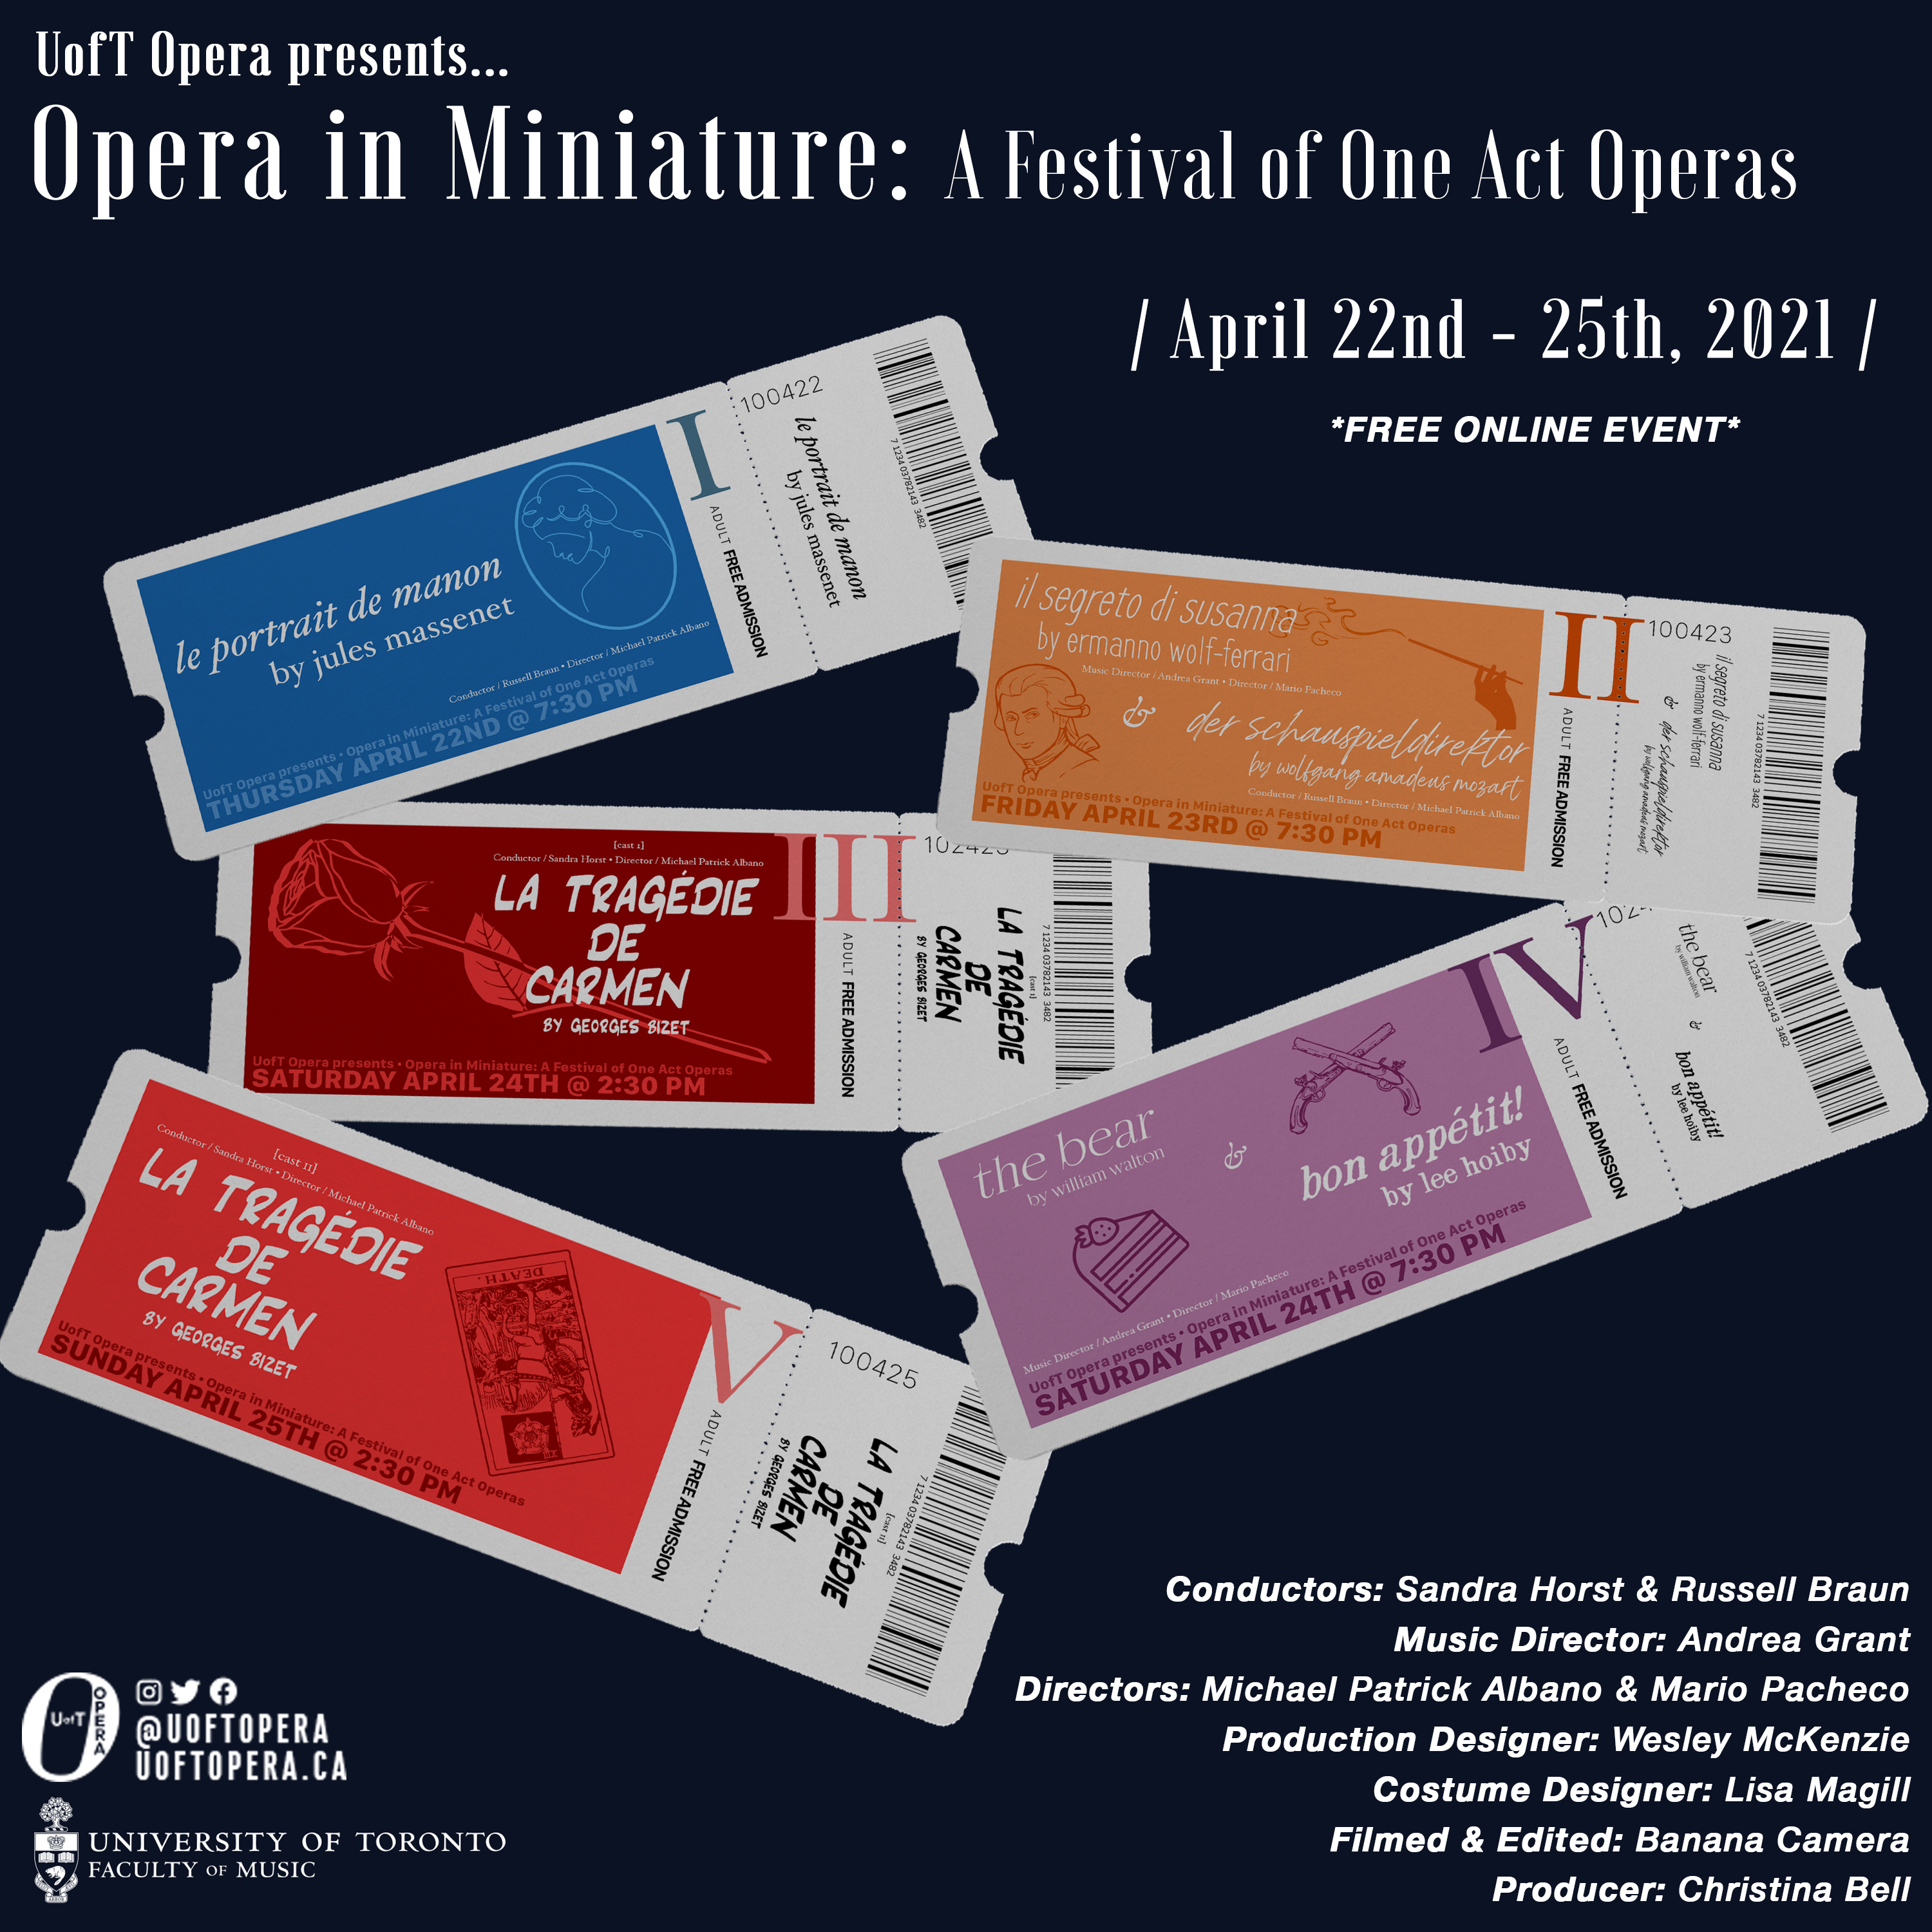 RESCHEDULED APRIL 22-25: U of T Opera presents Opera in Miniature: An Evening of One Act Operas (online)